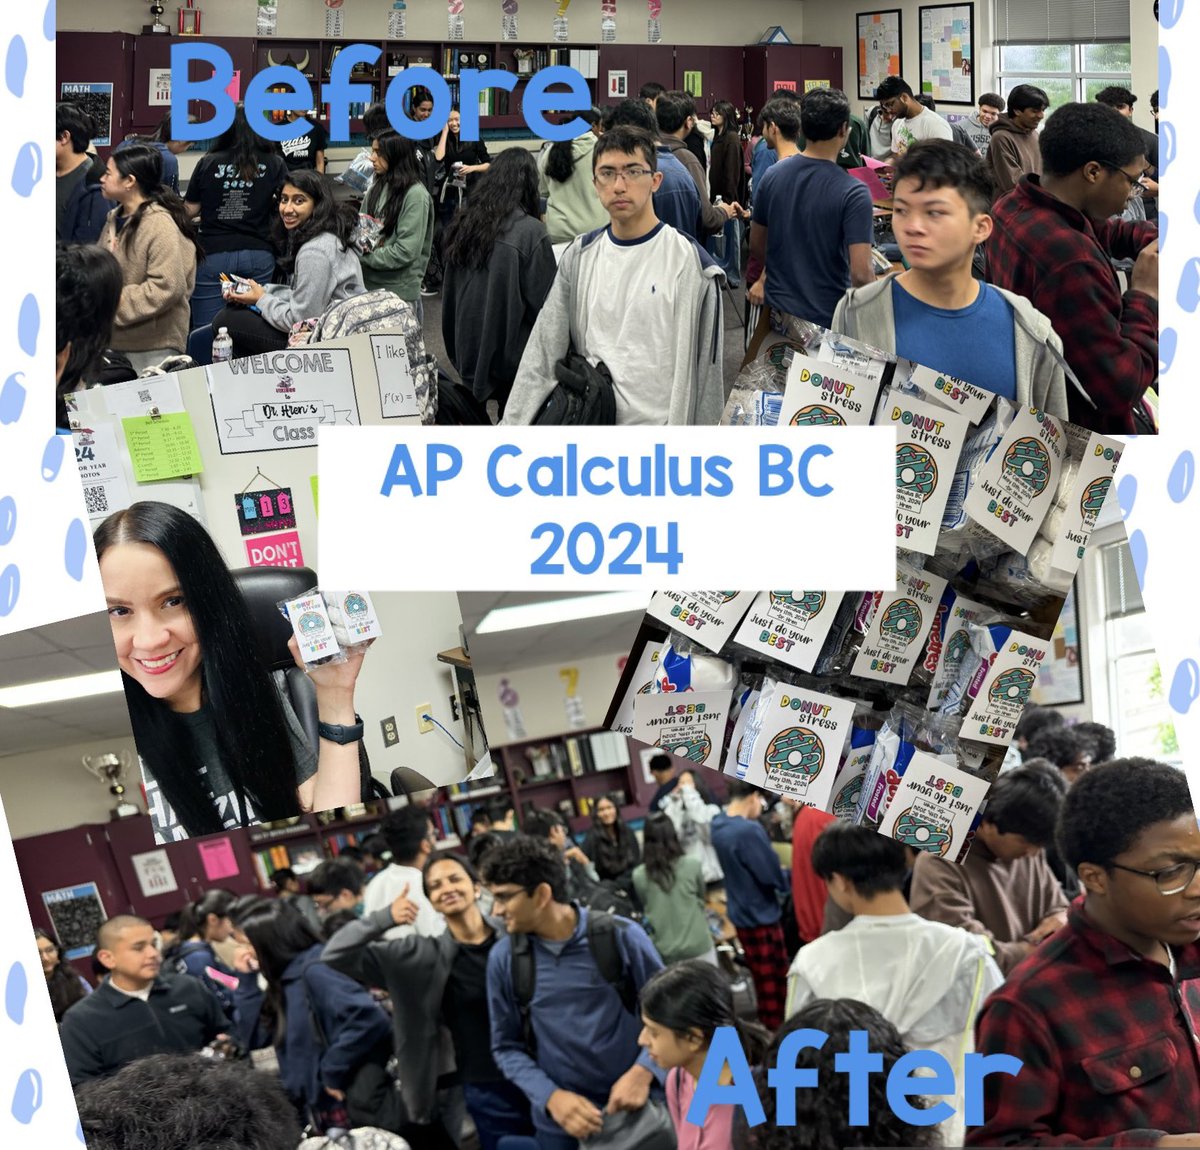 Before the AP Calculus BC exam: nerves, and last-minute cramming. 😬 After: smiles, relief, and the satisfaction of knowing they aced it! 📚🎉 #thisisAP #APCalculusBC #VikingPride ❤️💙